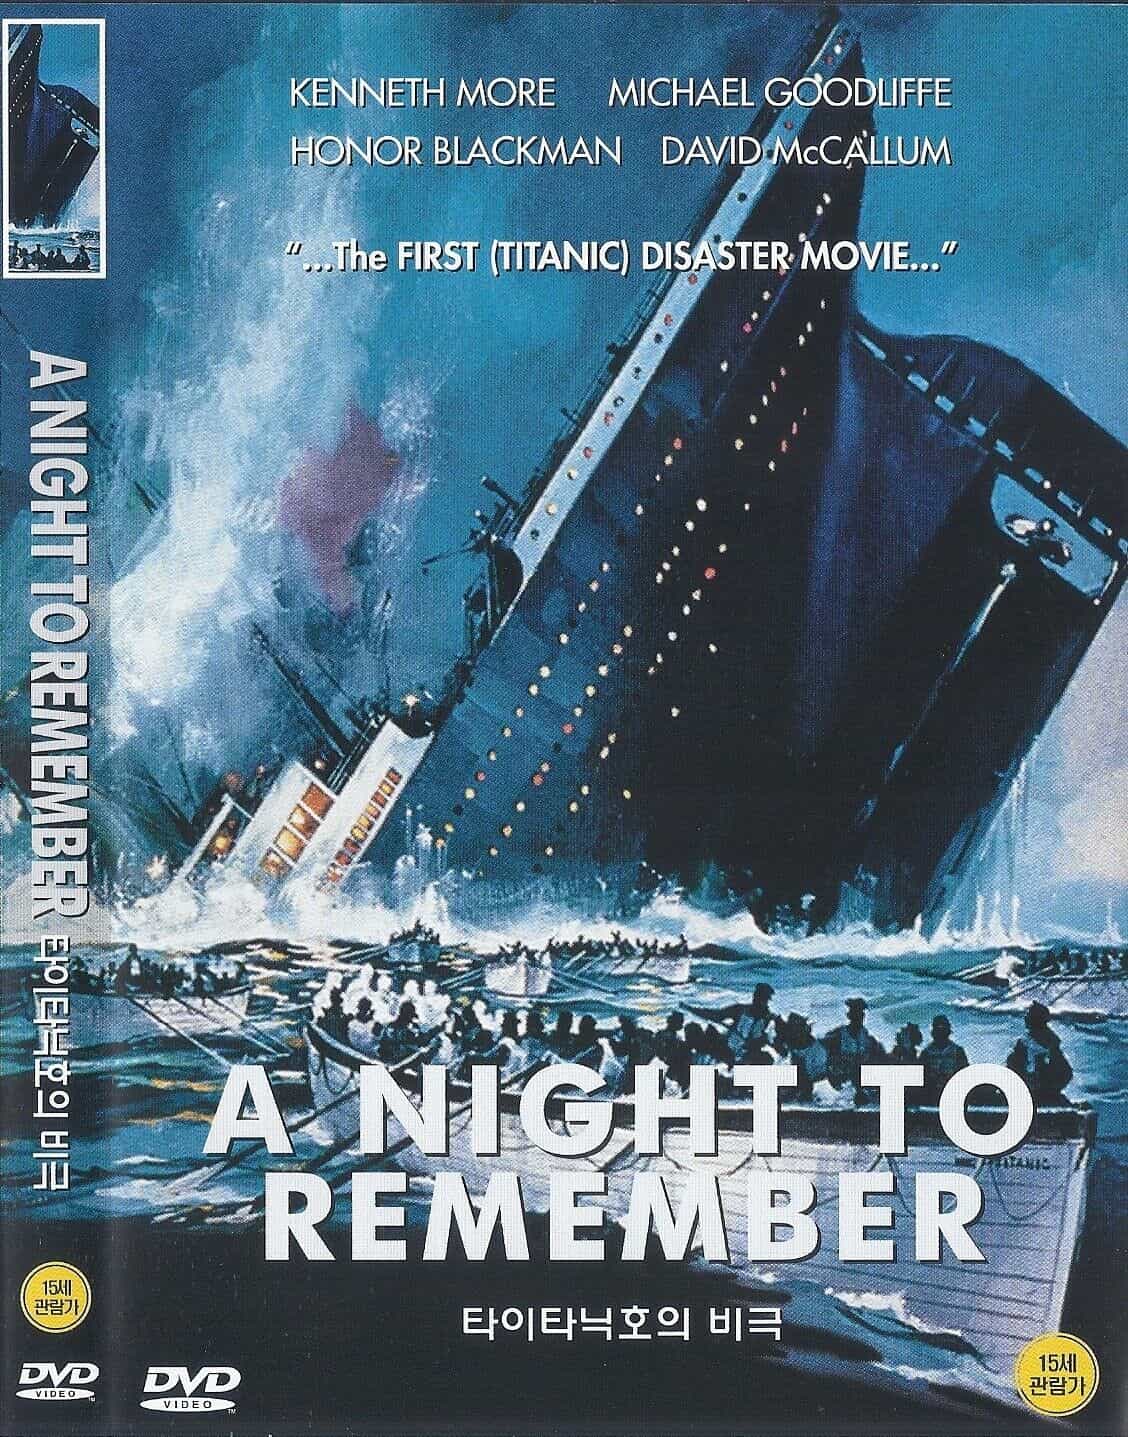 A Night to Remember (1958) Kenneth More / Ronald Allen DVD NEW - Luux Movie - The Best DVD And Blu-Ray Store